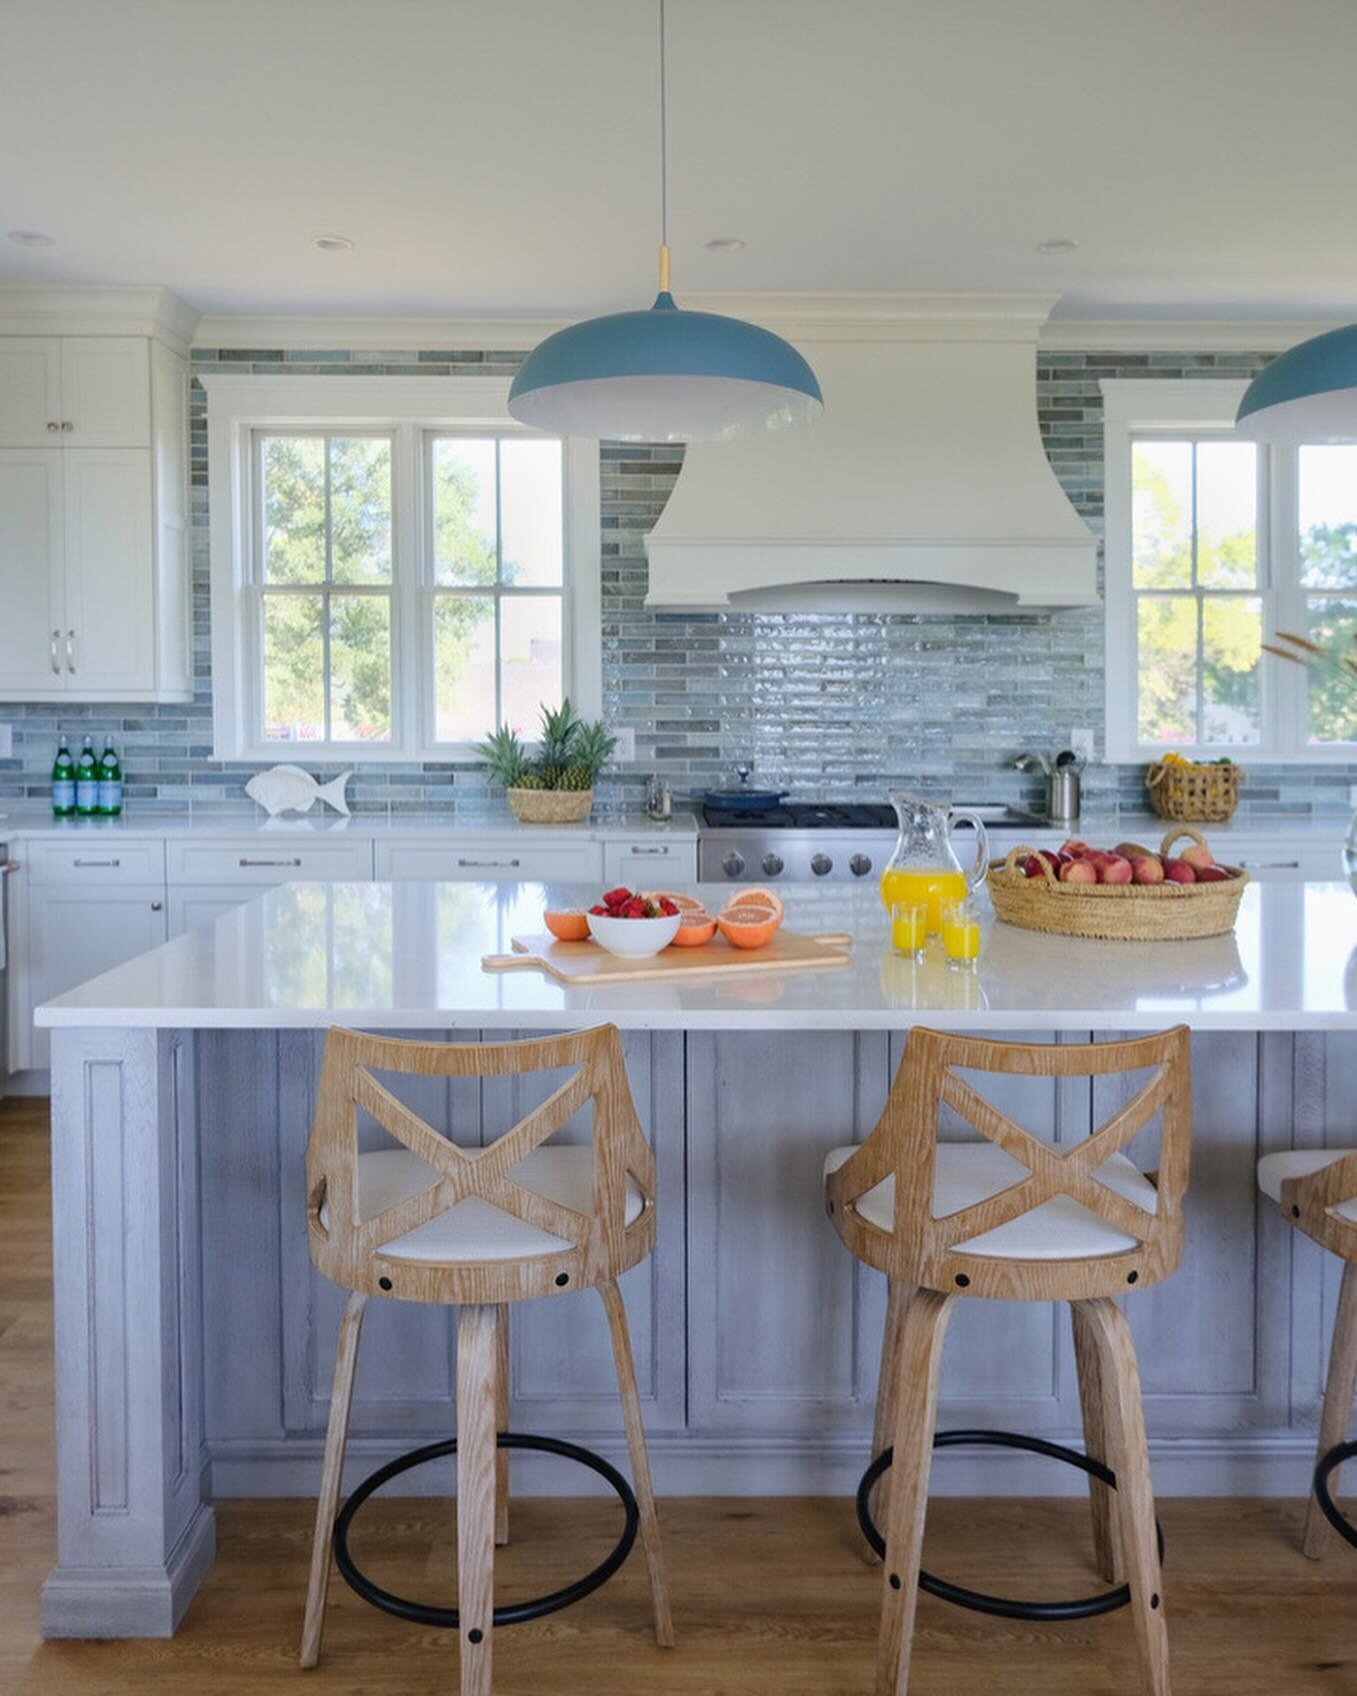 We selected a classic subway tile for this kitchen in shades of blue to give it a coastal feel. These zellige tile are handcrafted making each one is unique. The large wooden island ties it all together with plenty of seating and workspace. Photo cre